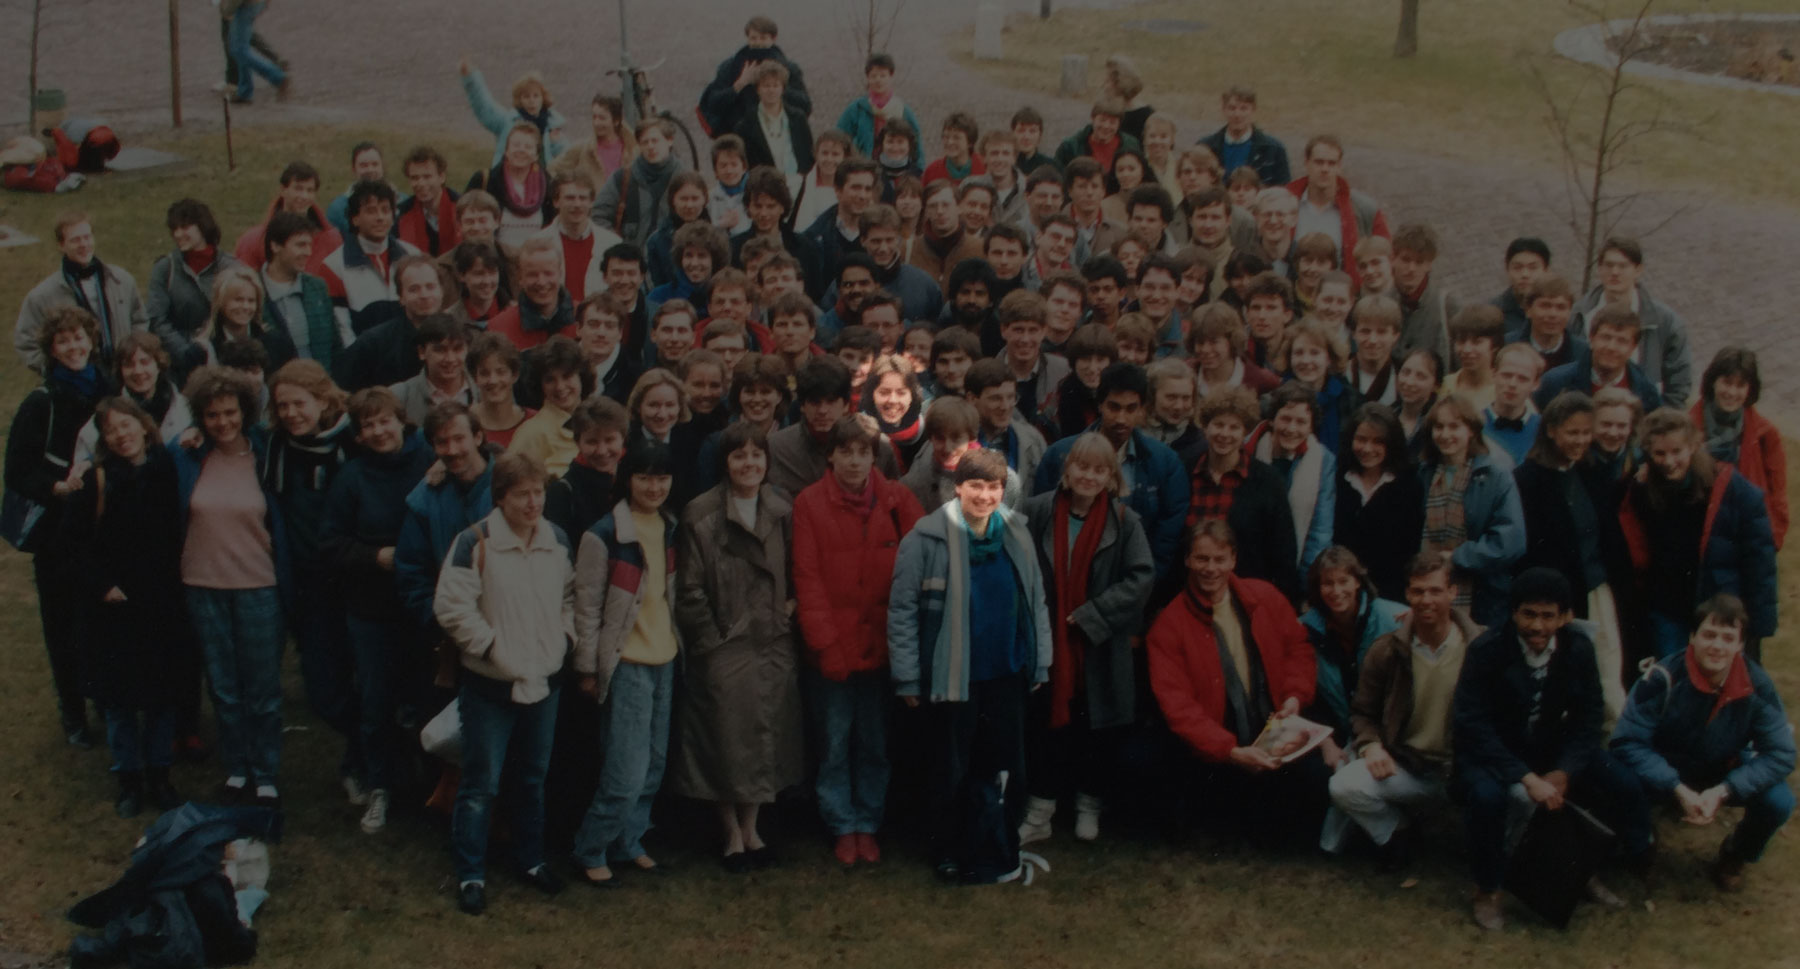 Dr. Marianne Broers (circled, left) and Dr. Ariëtte Sanders (circled, right) with their Leiden Medical School class in 1982.